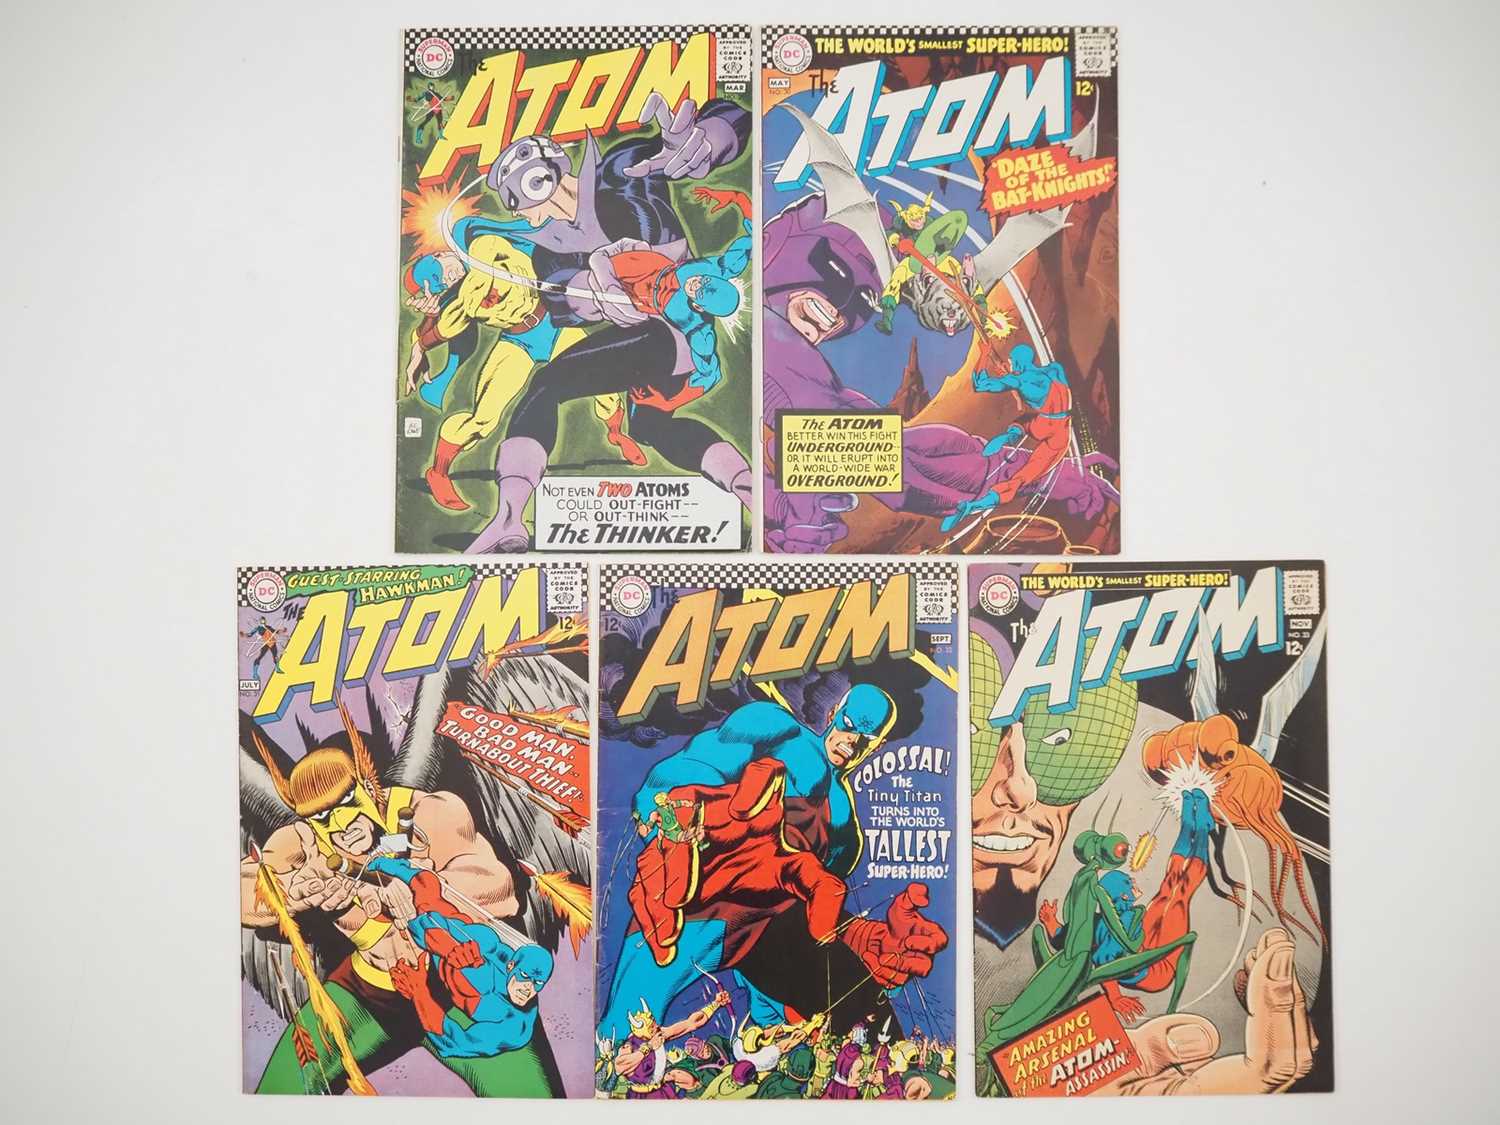 ATOM #29, 30, 31, 32, 33 (5 in Lot) - (1966/1967 - DC) - Includes the first solo appearance of the